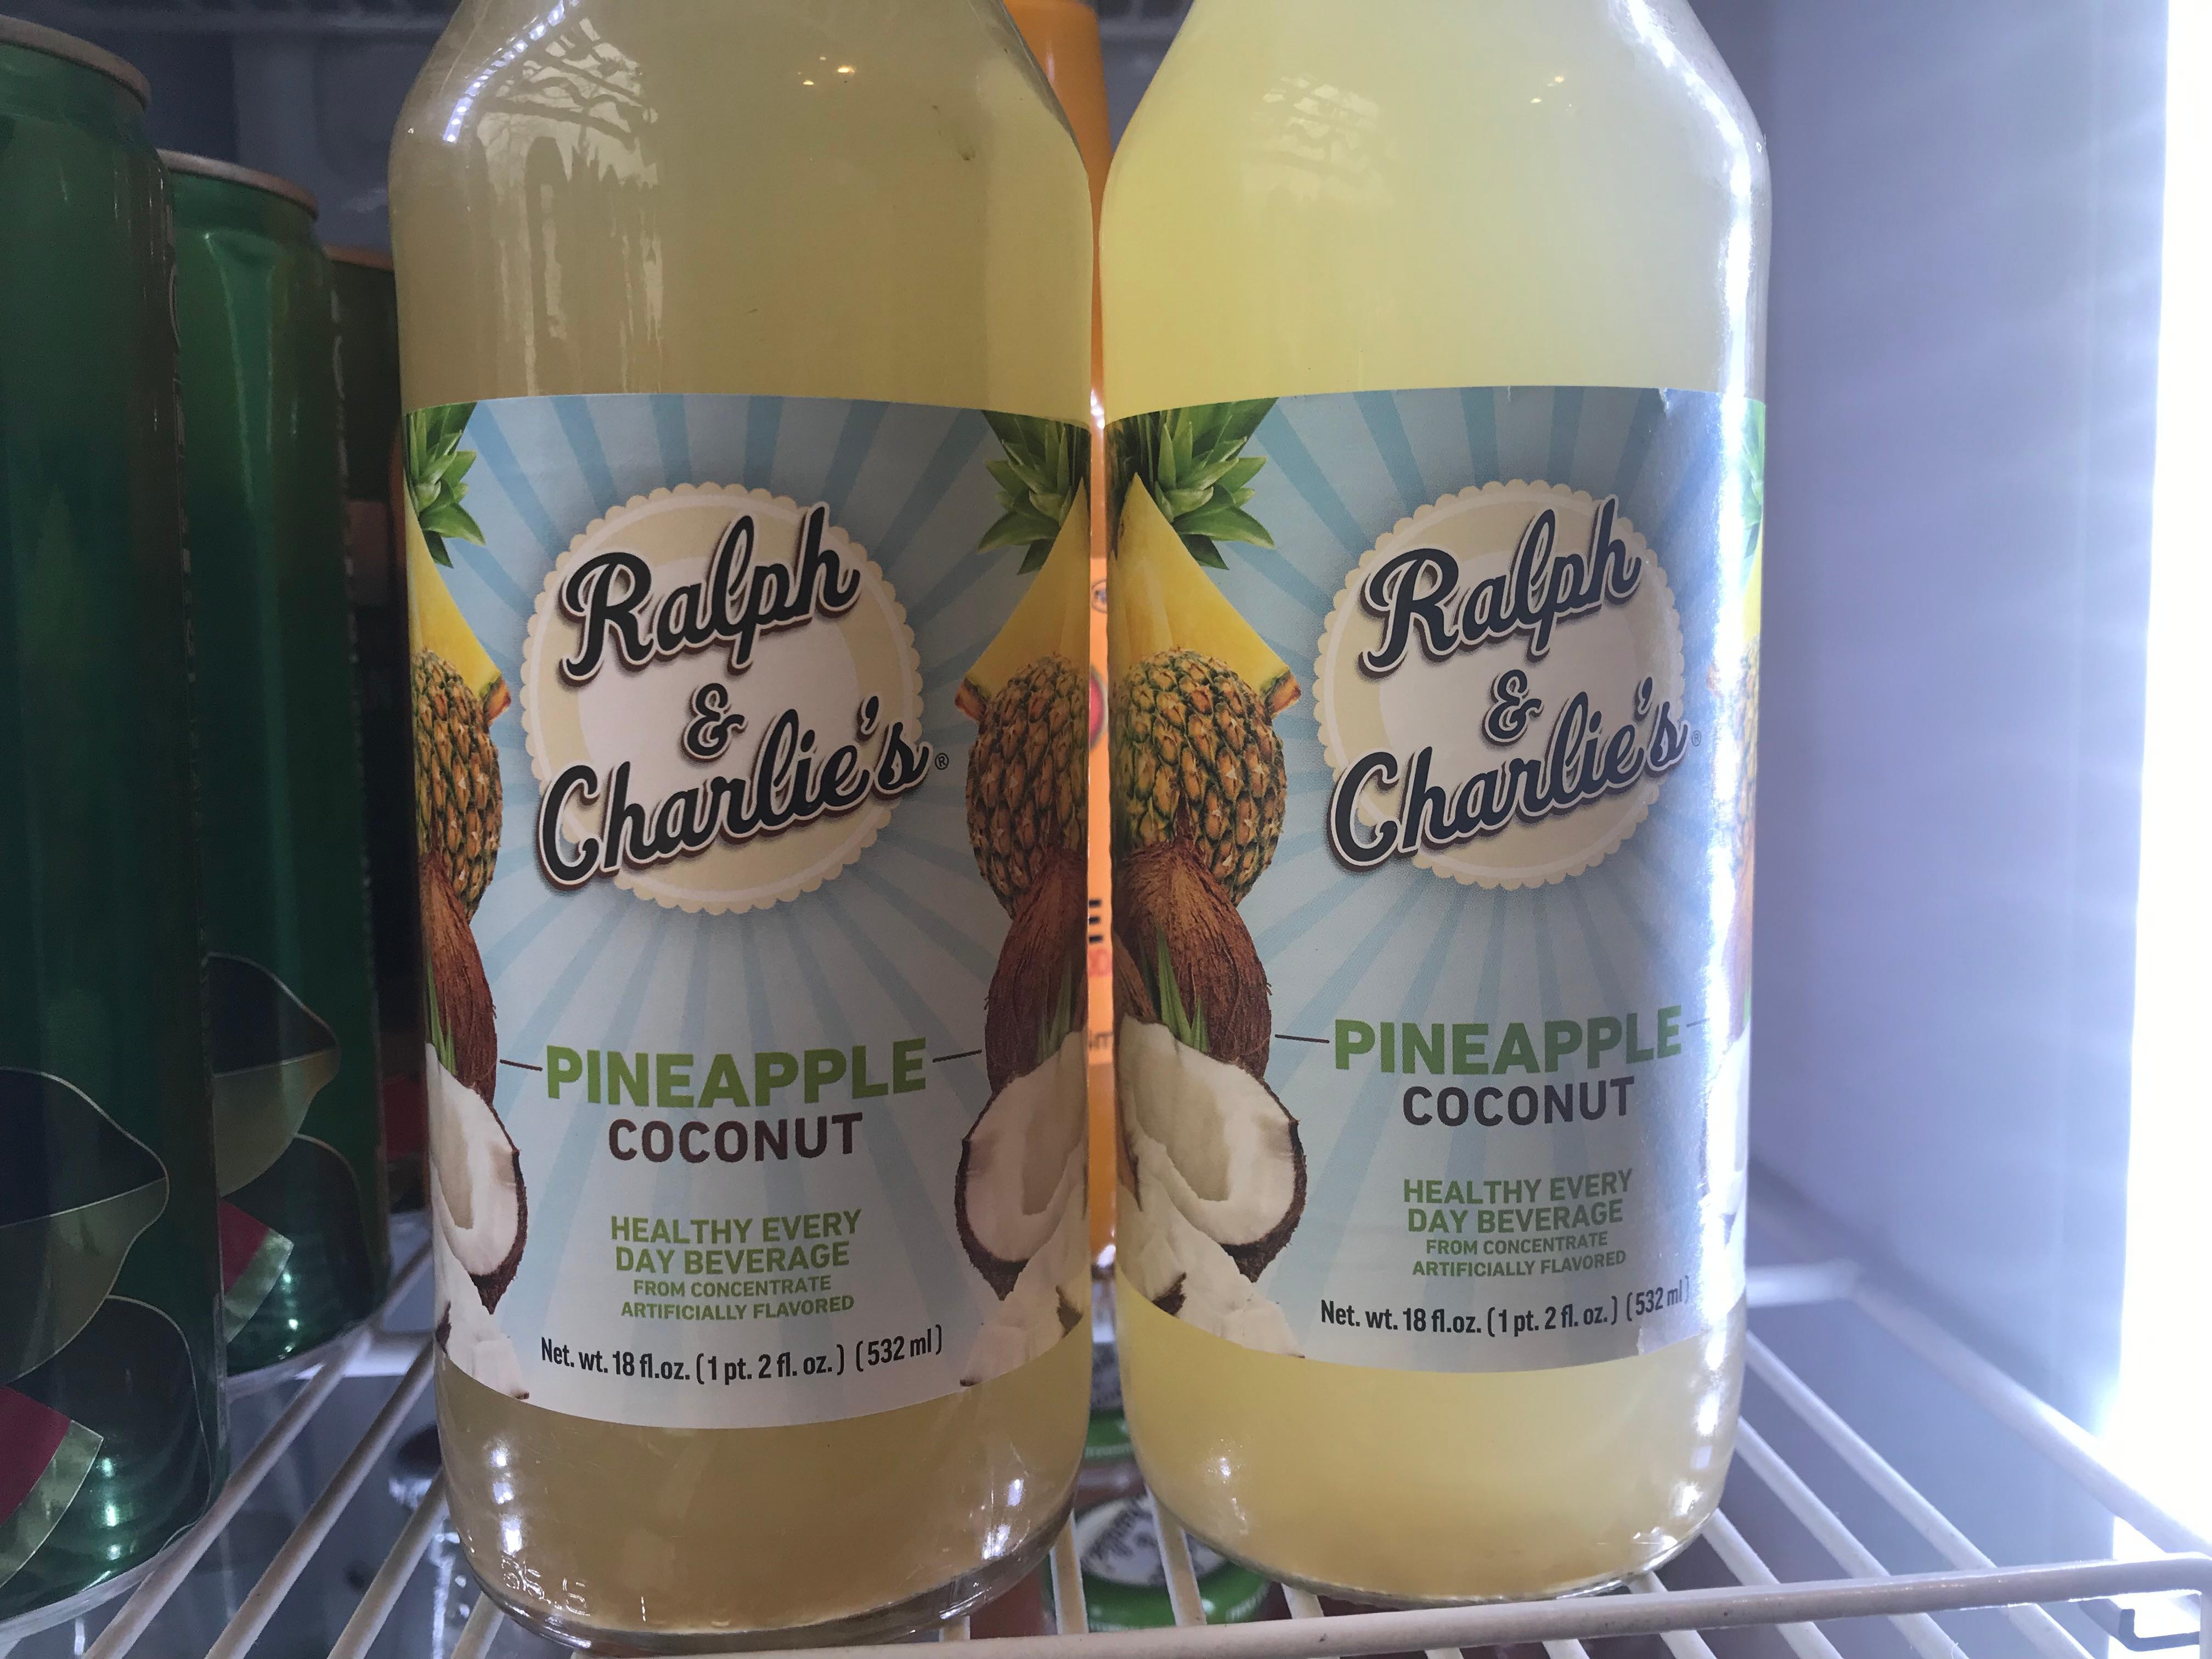 Ralph and Charlie’s 180z pineapple coconut